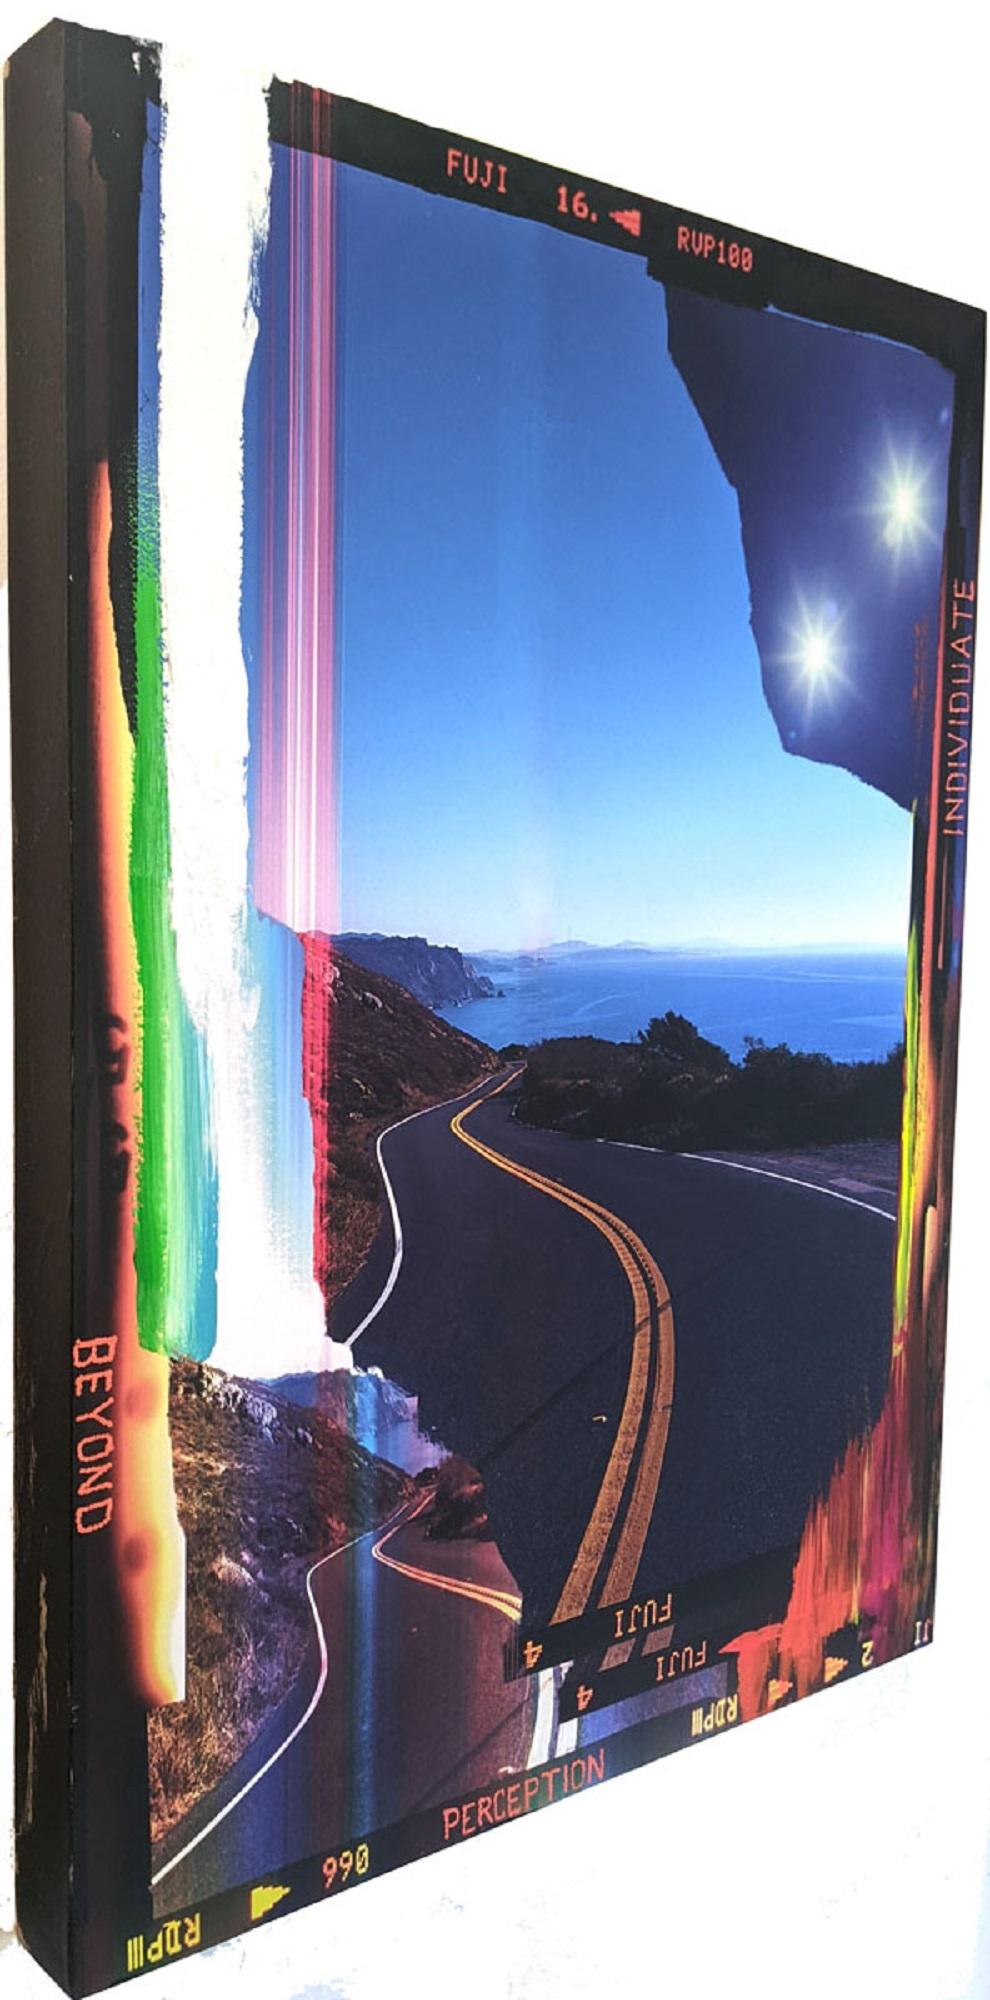 Meta Road, Individuate, California Hwy 1 (Abstract Photography) For Sale 3